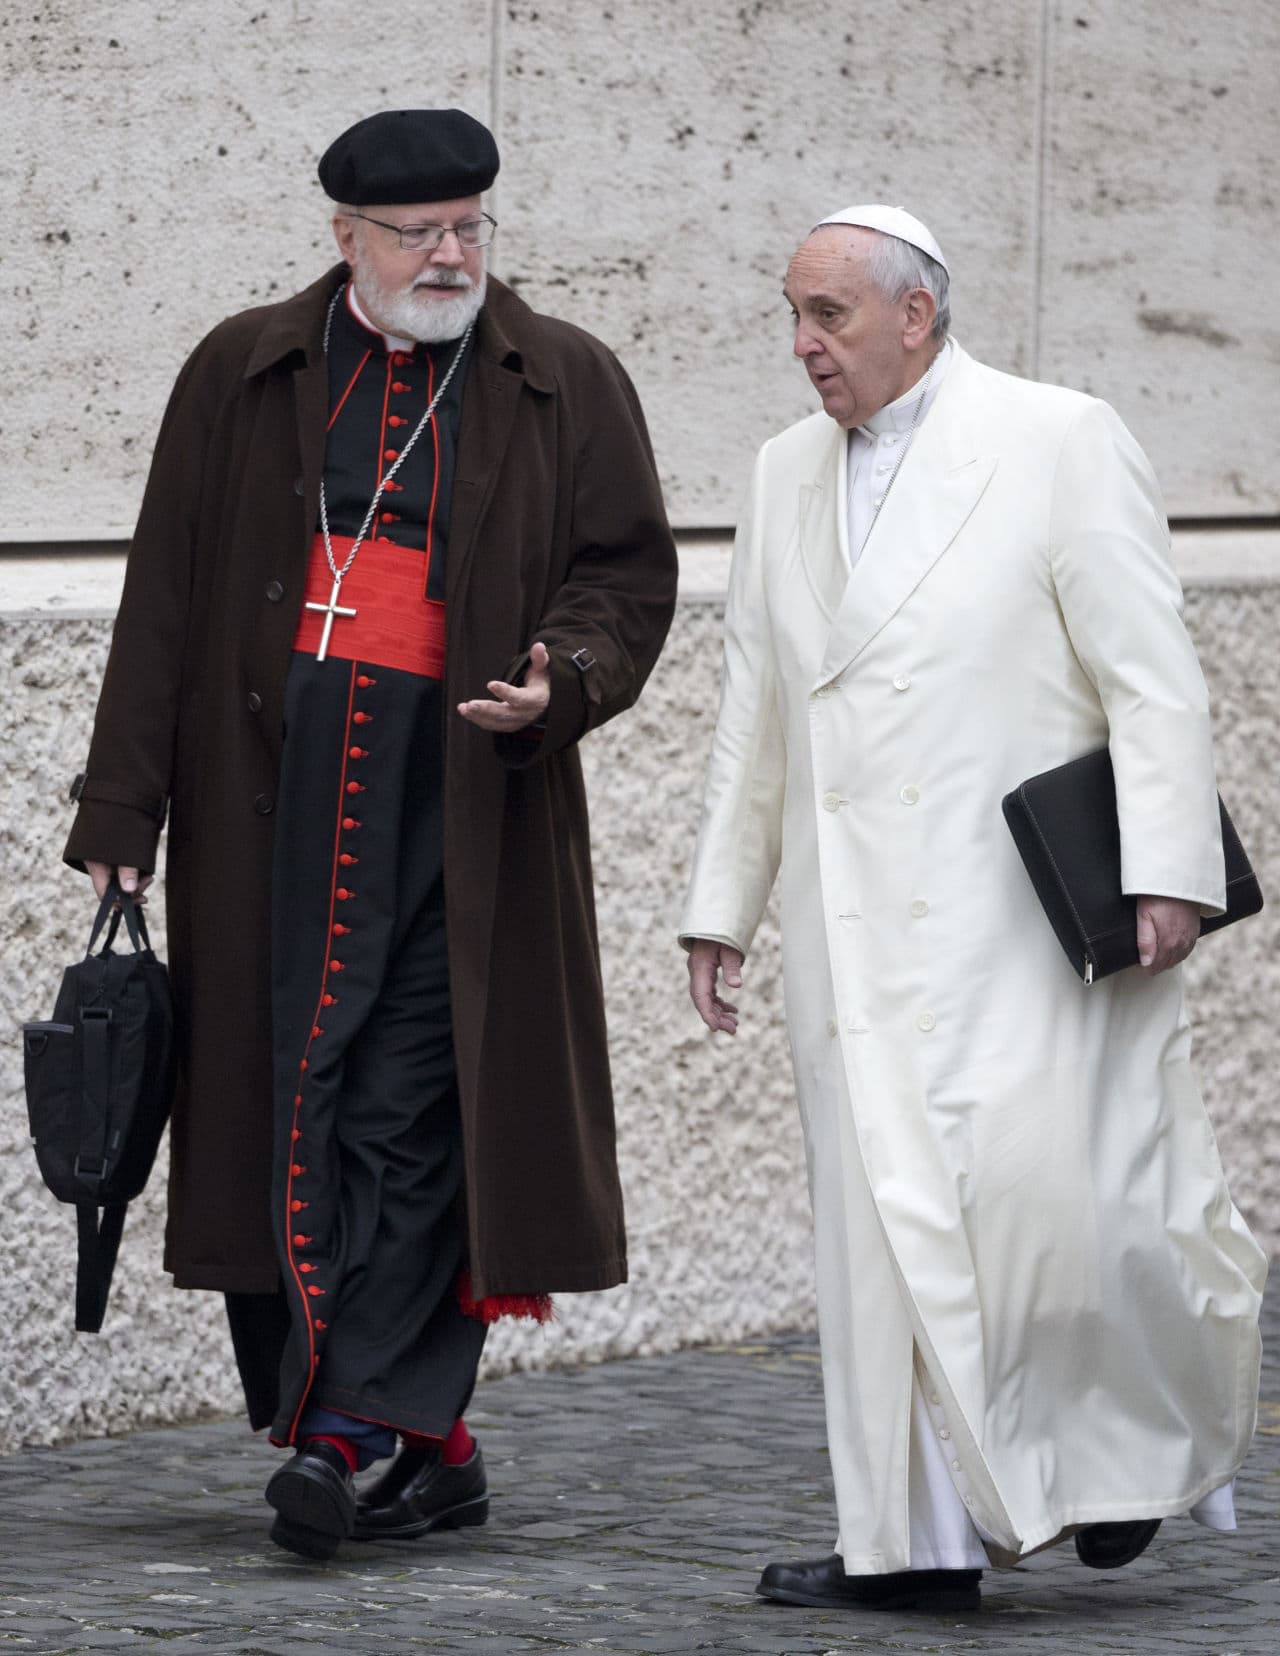 In this Feb. 13, 2015 file photo, Pope Francis, right, talks with Cardinal Sean O'Malley, of Boston, as they arrive for a special consistory in the Synod Hall at the Vatican. (Andrew Medichini/AP/File)